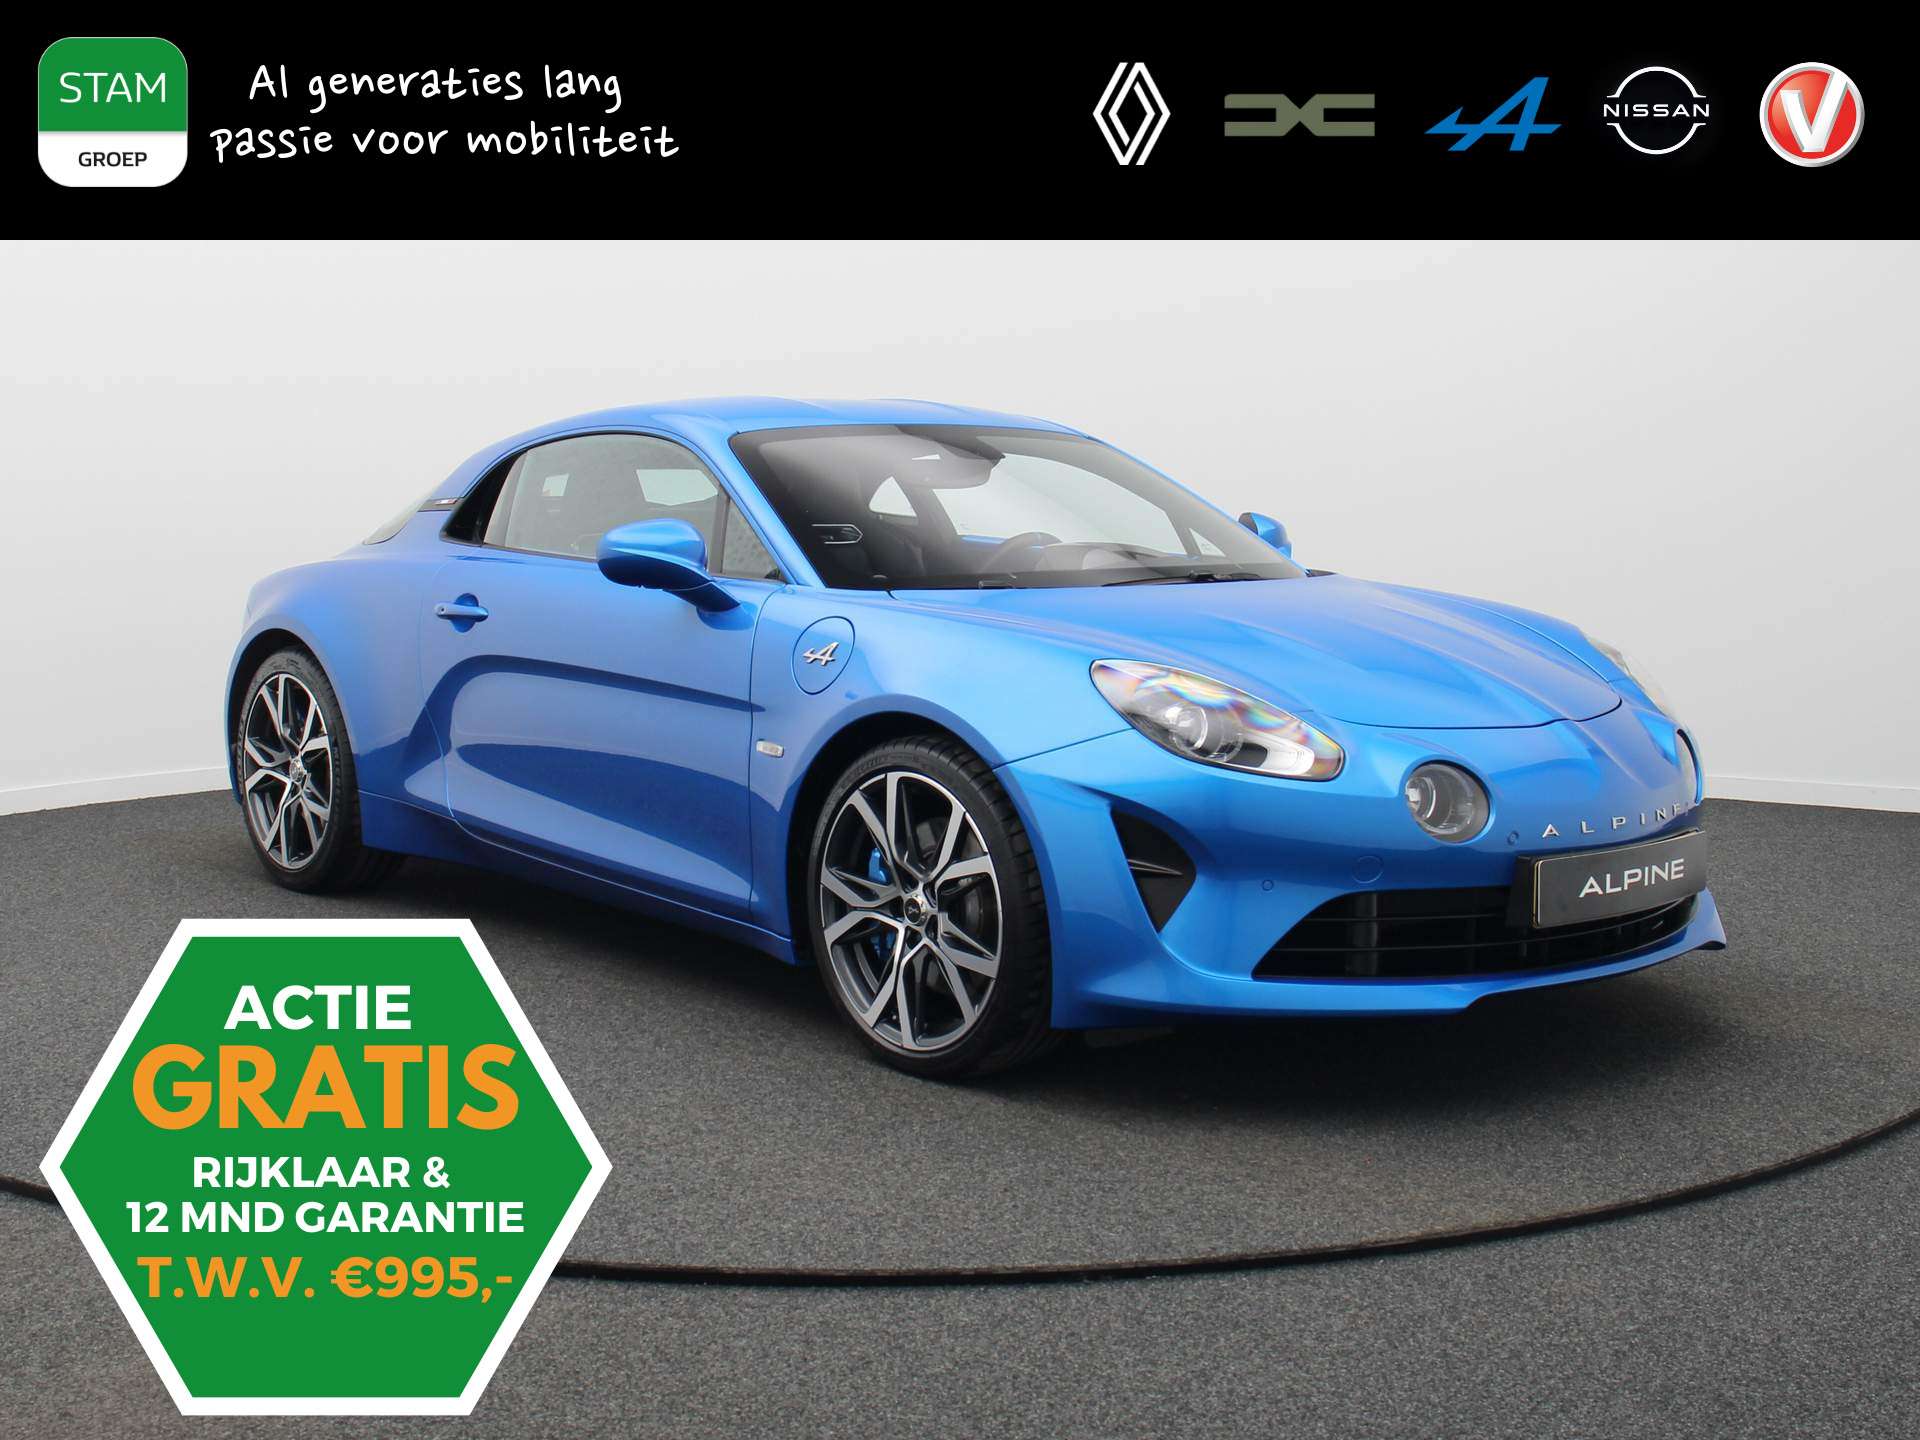 Alpine A110 Coupe in Blue used in SOEST for € 69,990.-